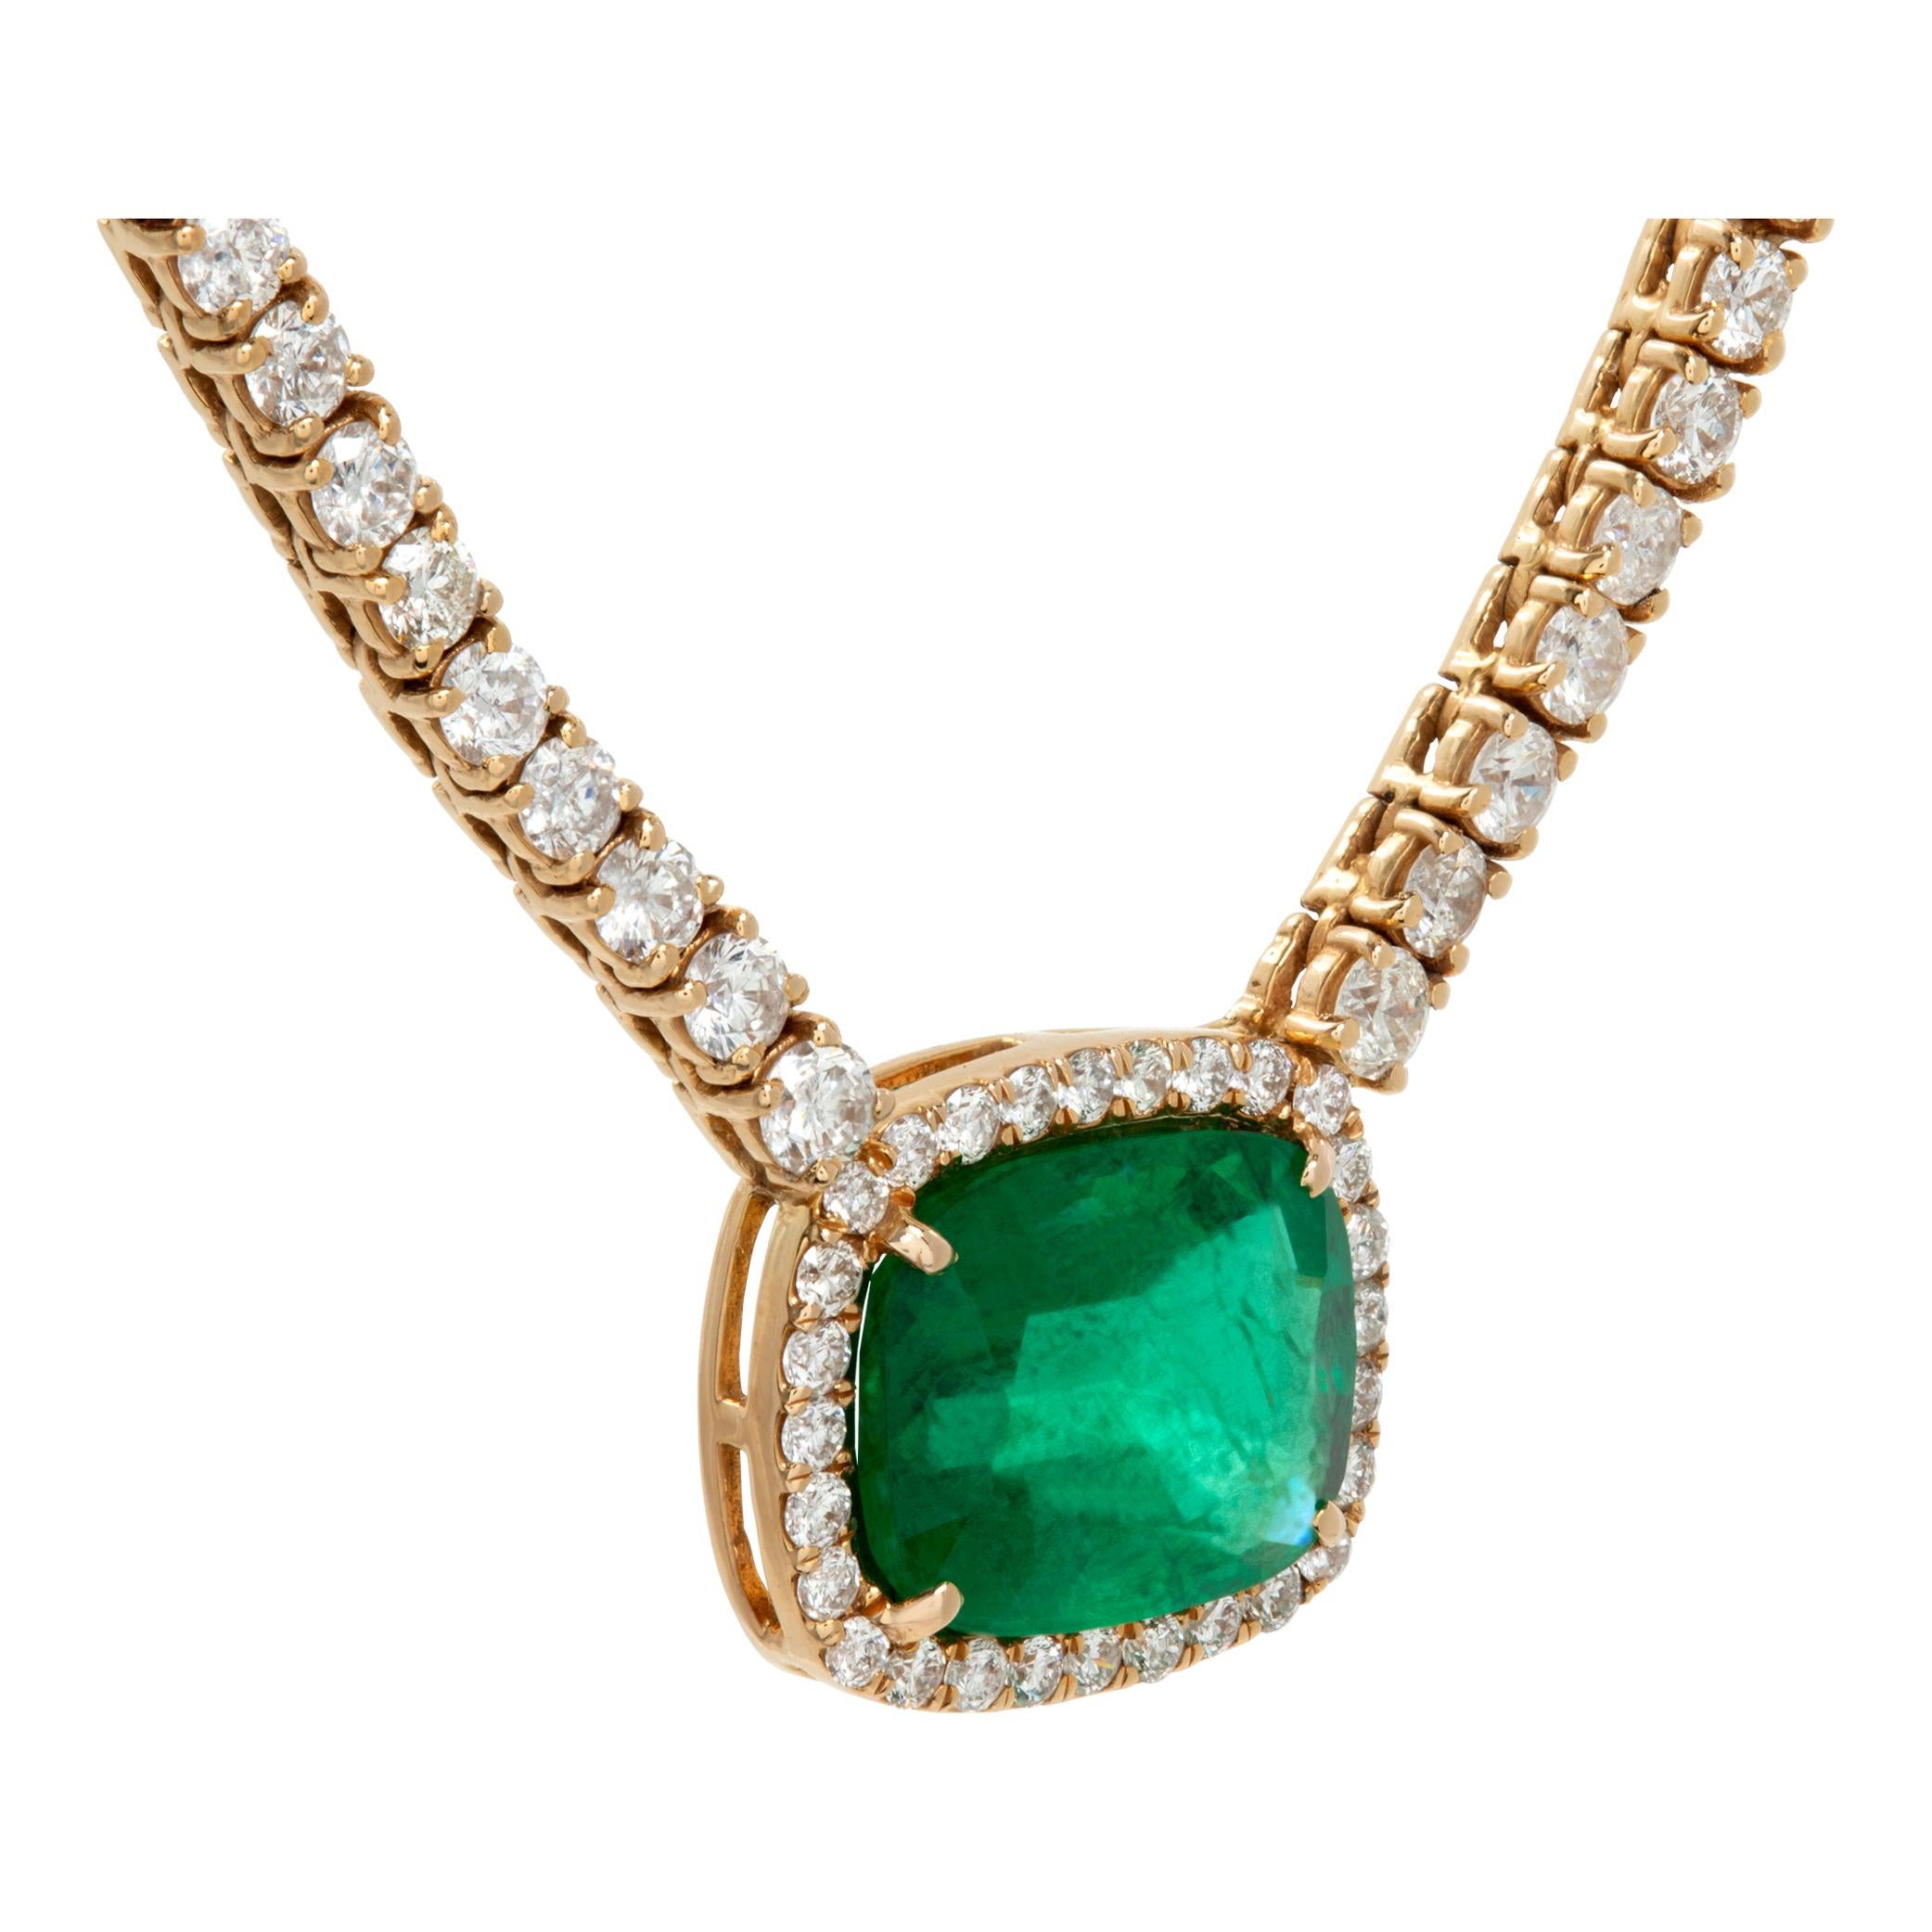 Emerald & diamond 18k yellow gold necklace In Excellent Condition For Sale In Surfside, FL